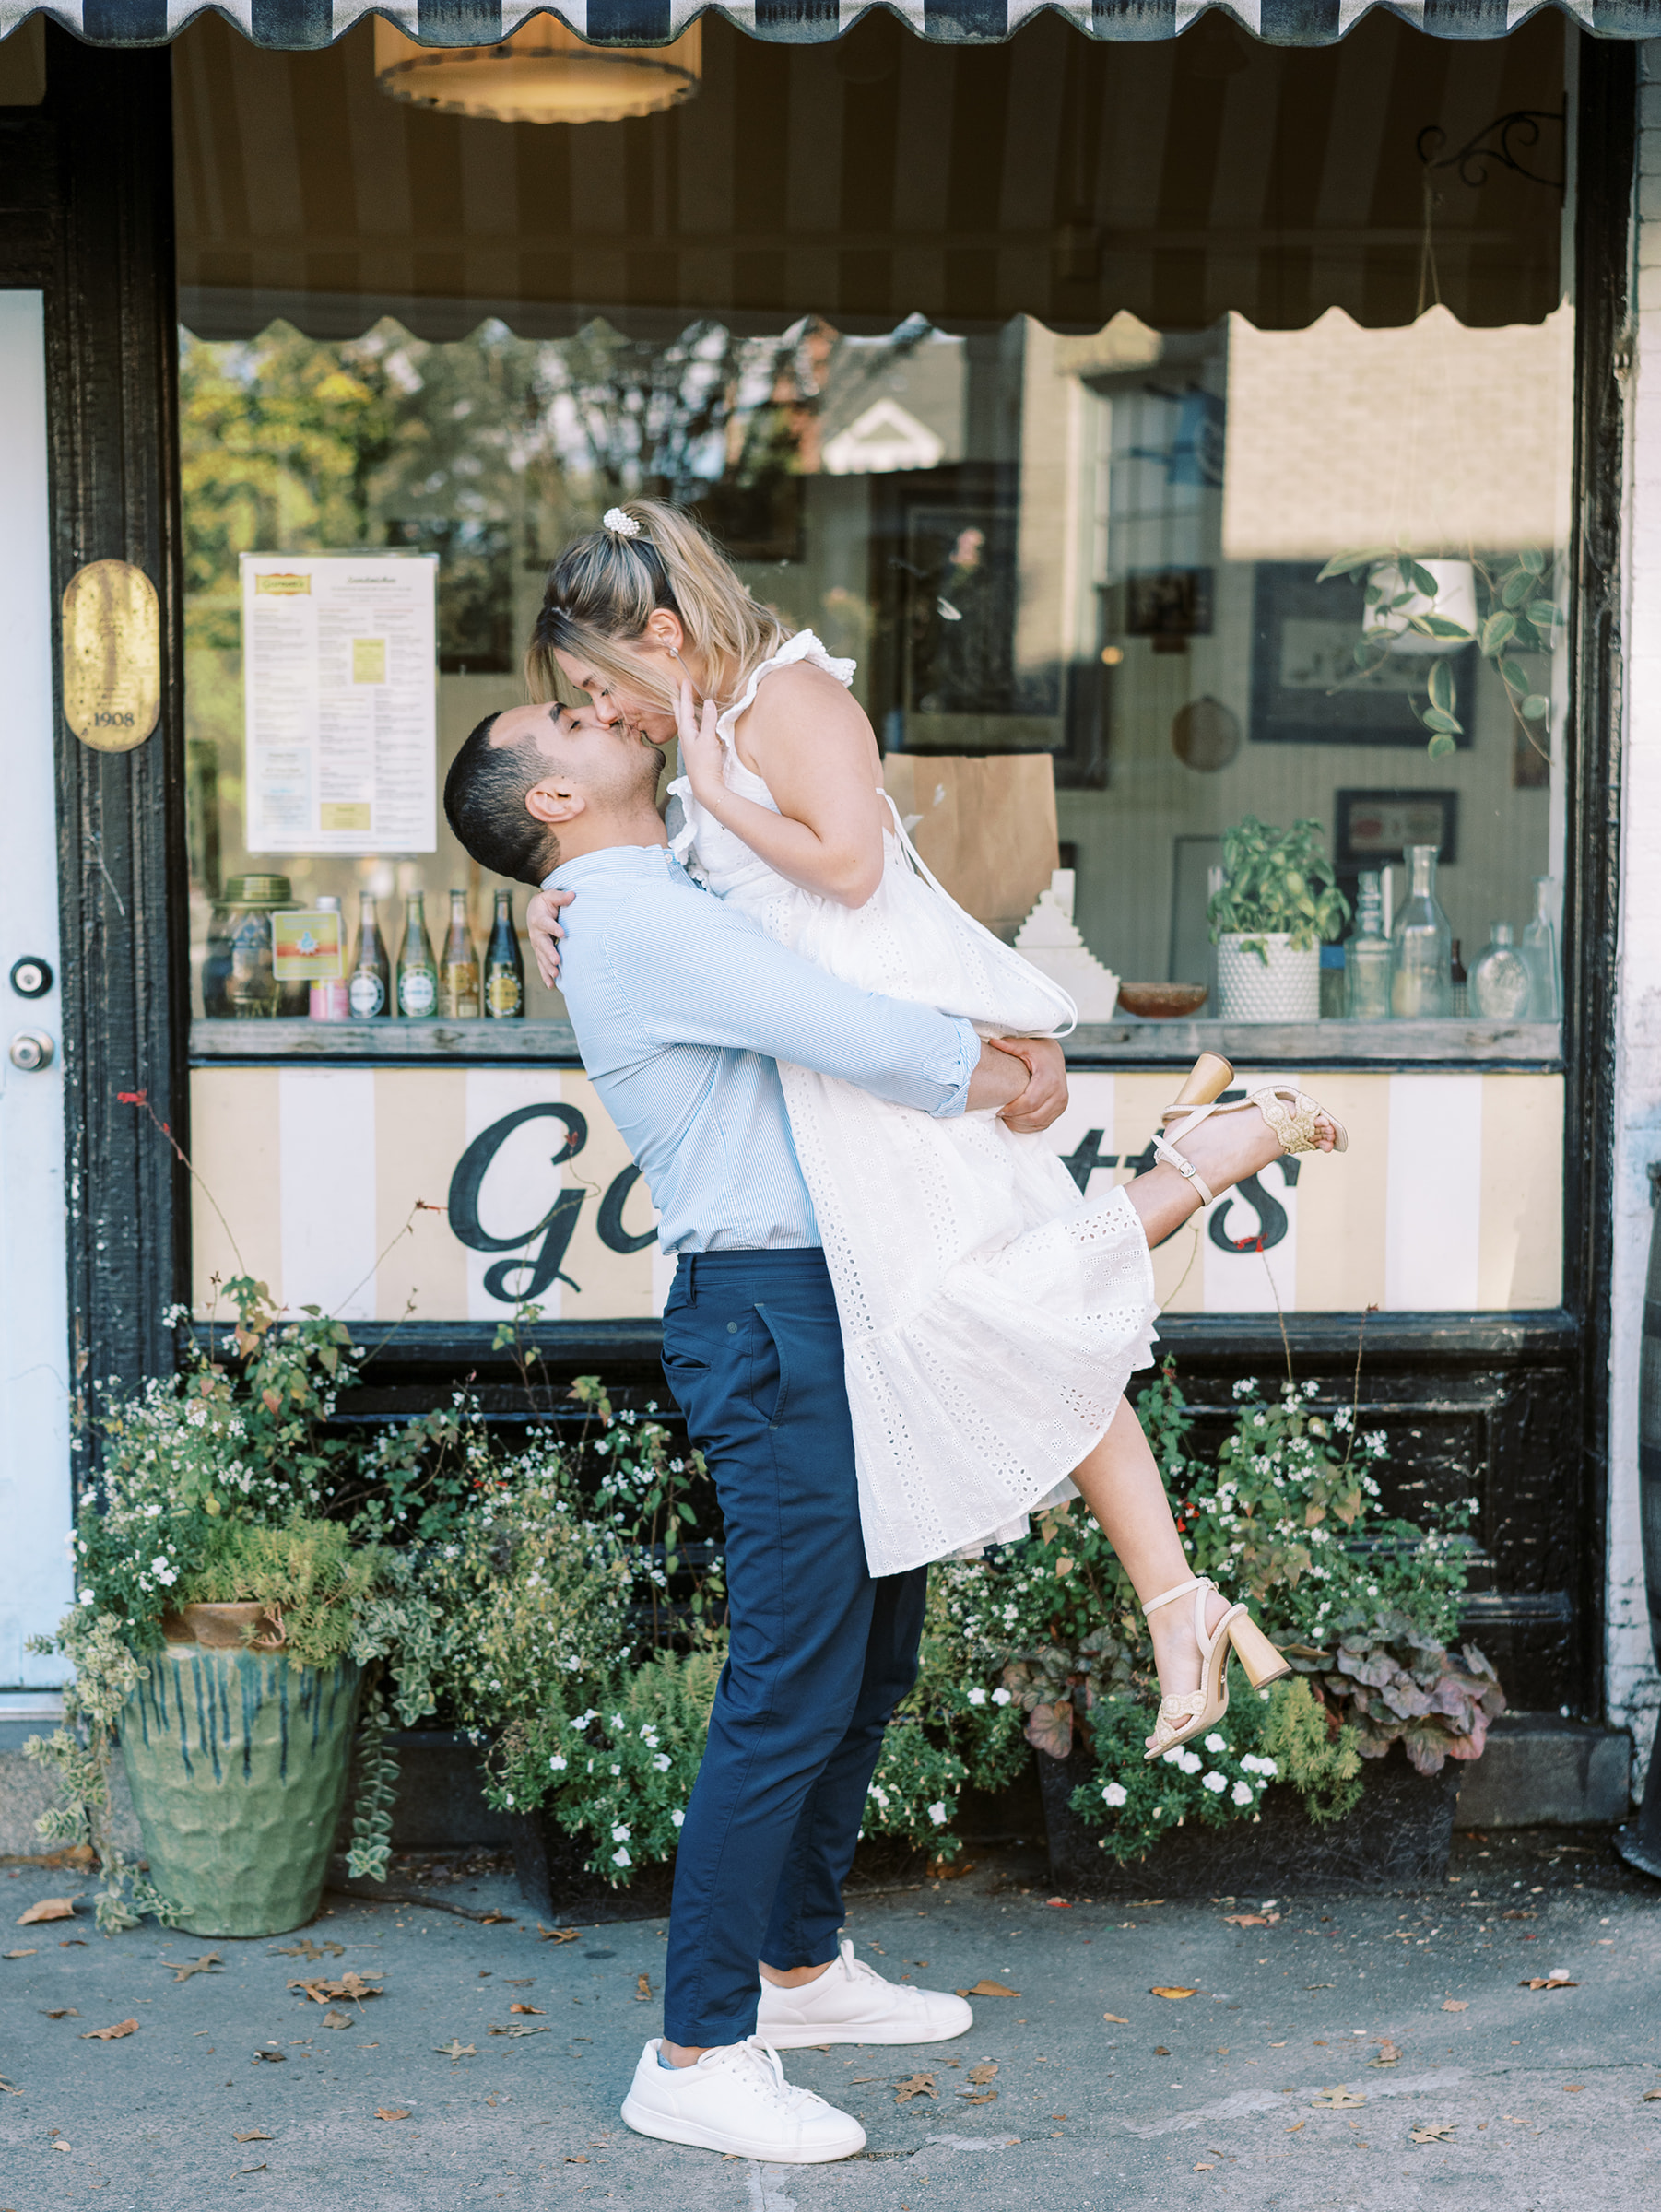 A couple's engagement photo kissing in front of Garnetts Sandwich Shop in Richmond Virginia